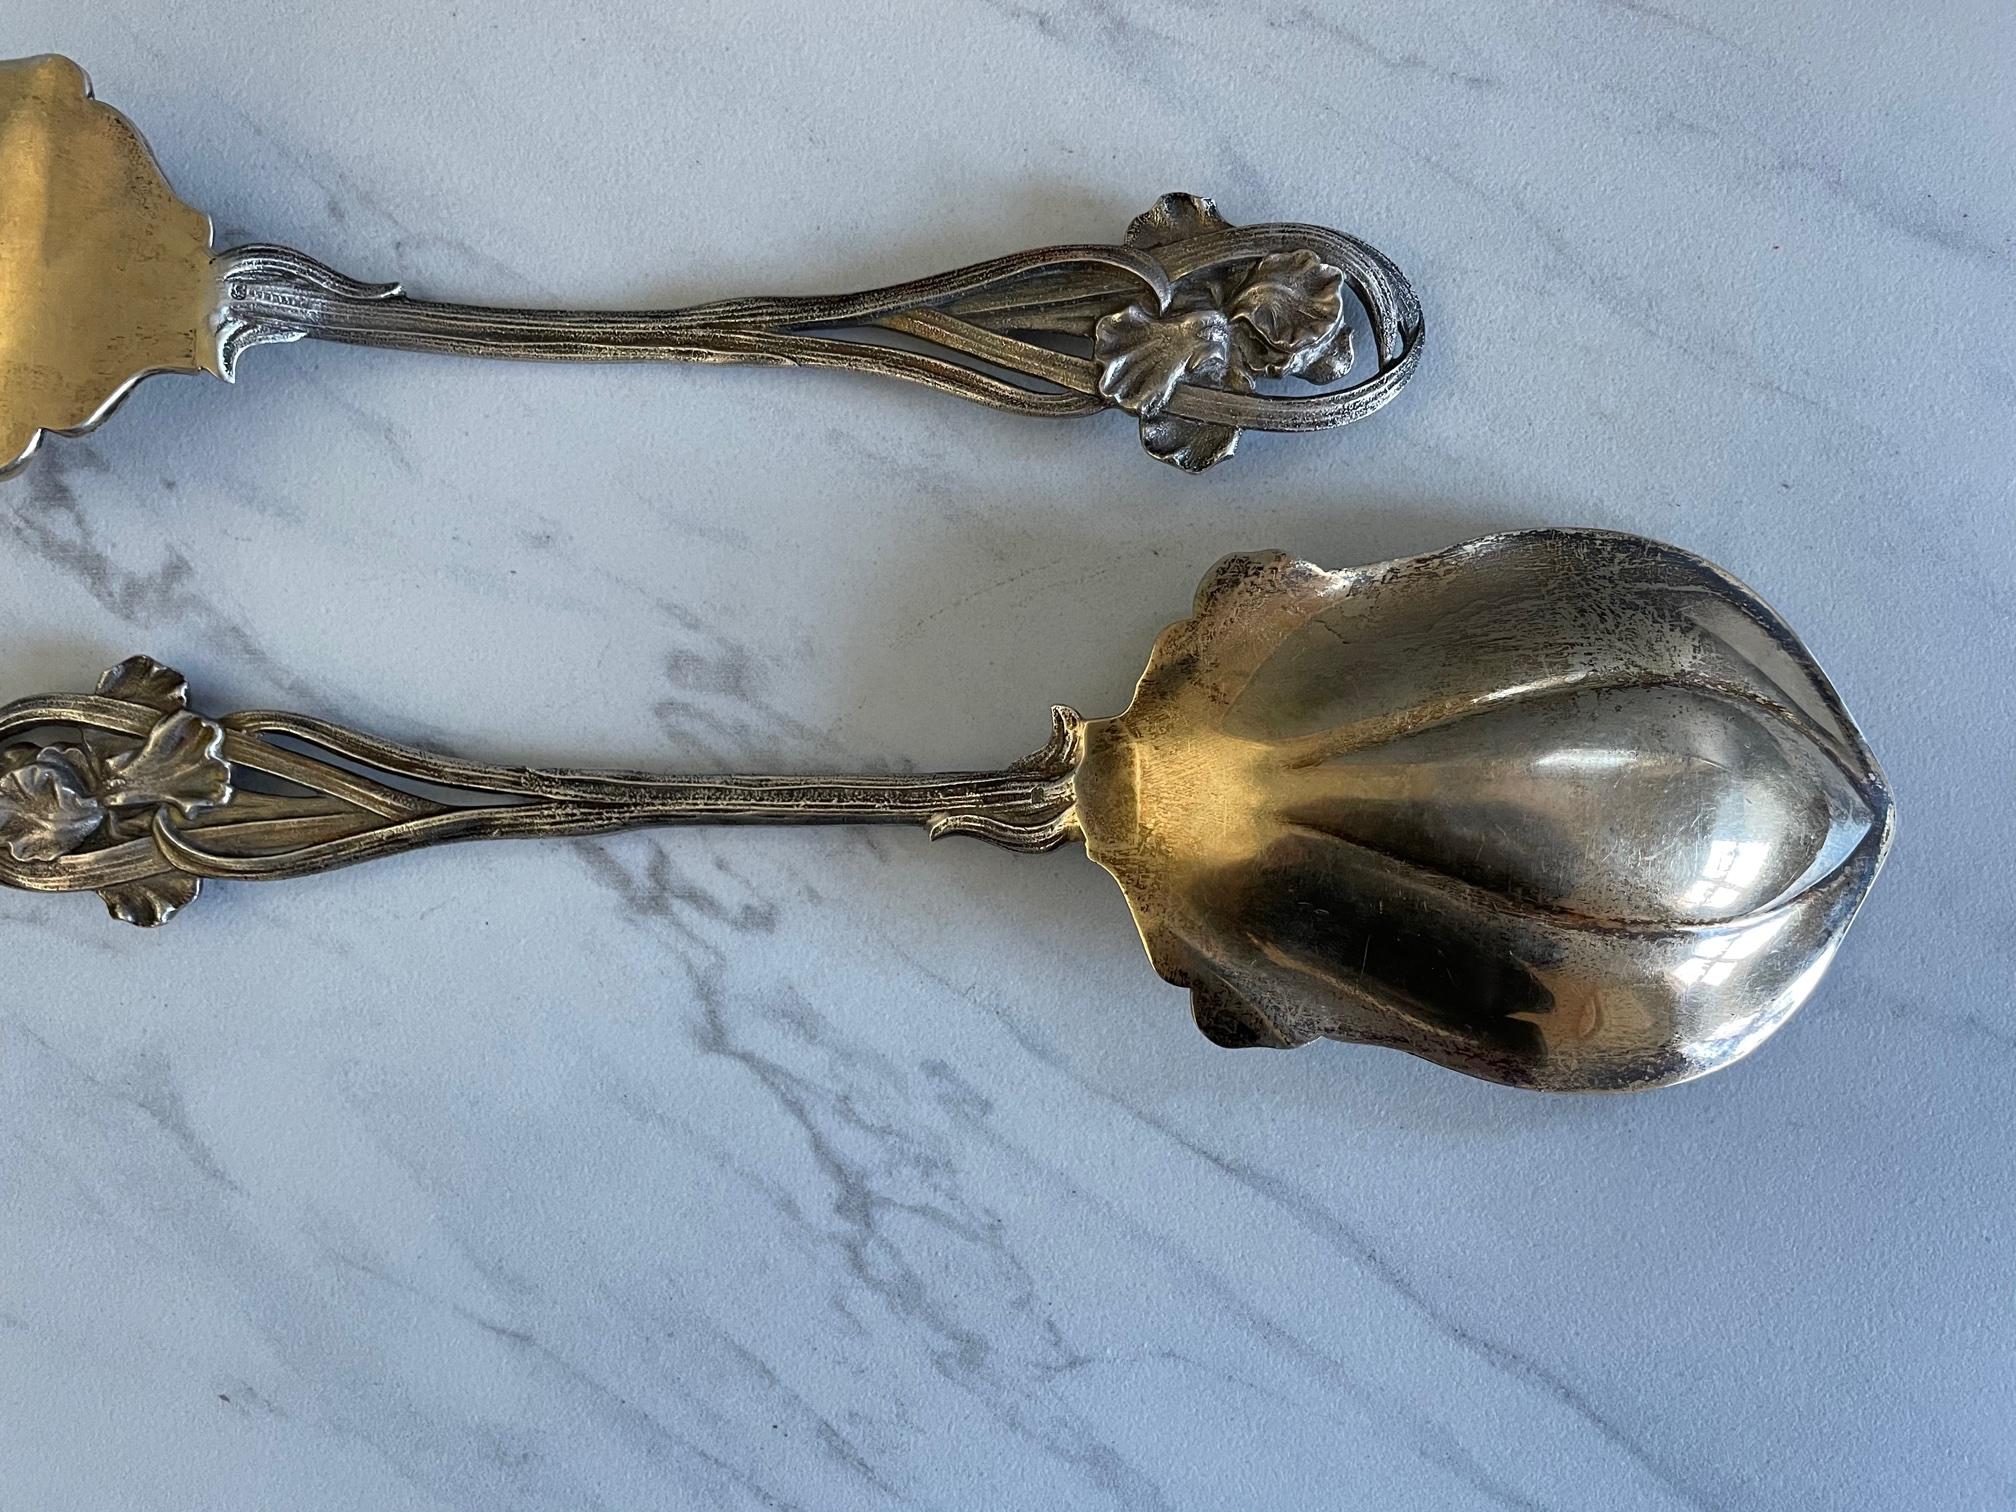 This Art Nouveau vintage sterling Silver salad serving set from Towle features a delicate floral and stem pattern. It includes a fork and spoon large enough for serving.  Pieces are silver, but photos are reflecting light which casts a goldish